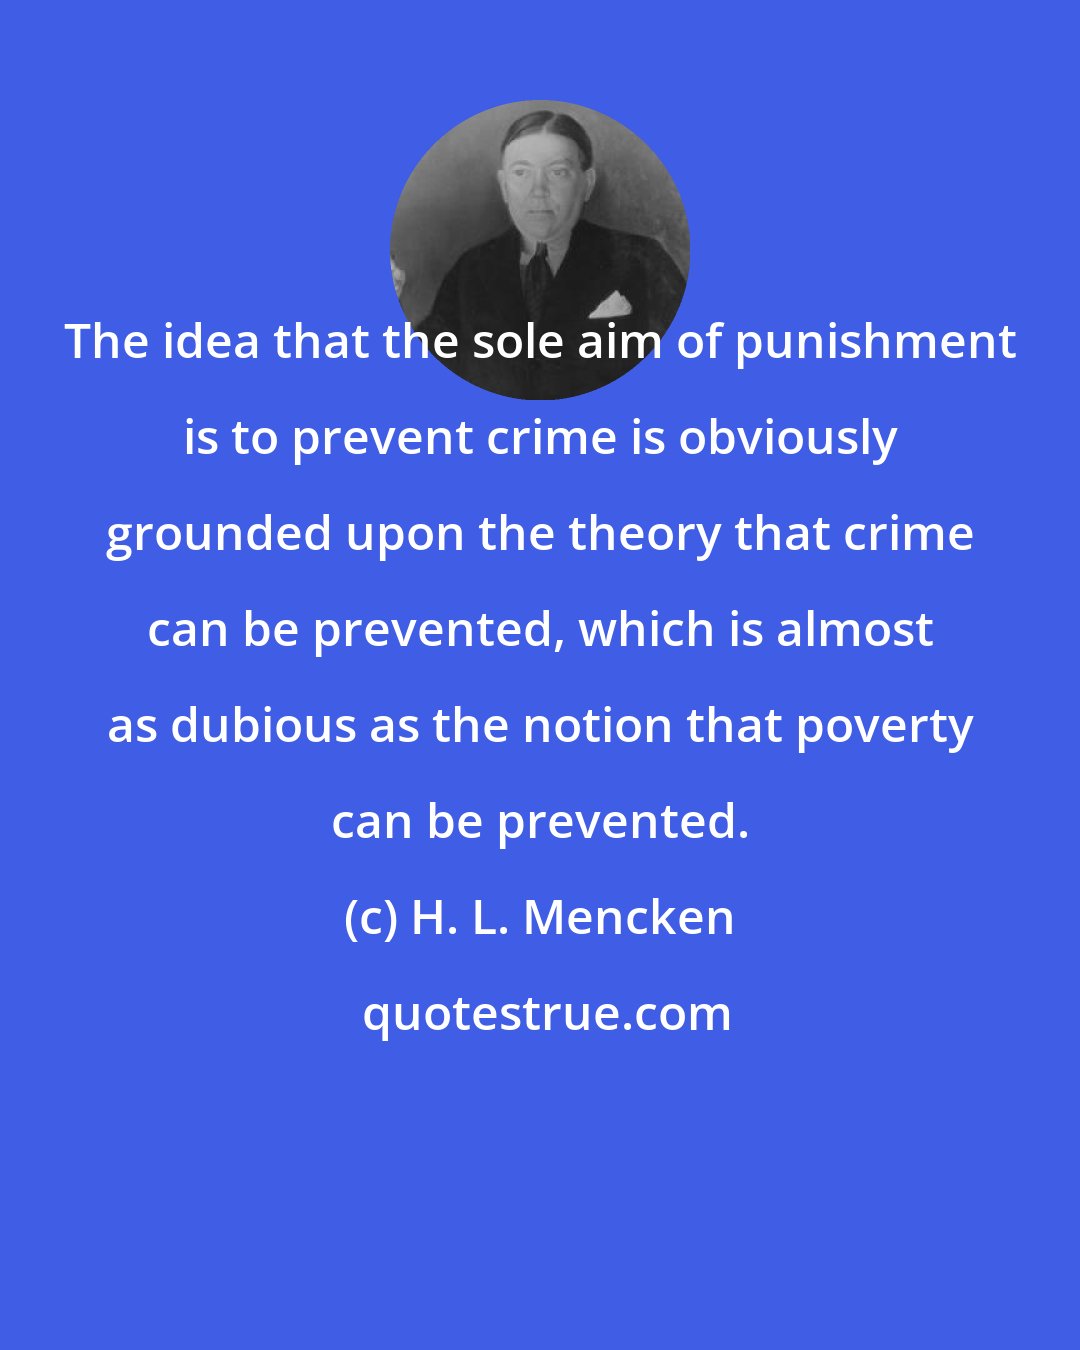 H. L. Mencken: The idea that the sole aim of punishment is to prevent crime is obviously grounded upon the theory that crime can be prevented, which is almost as dubious as the notion that poverty can be prevented.